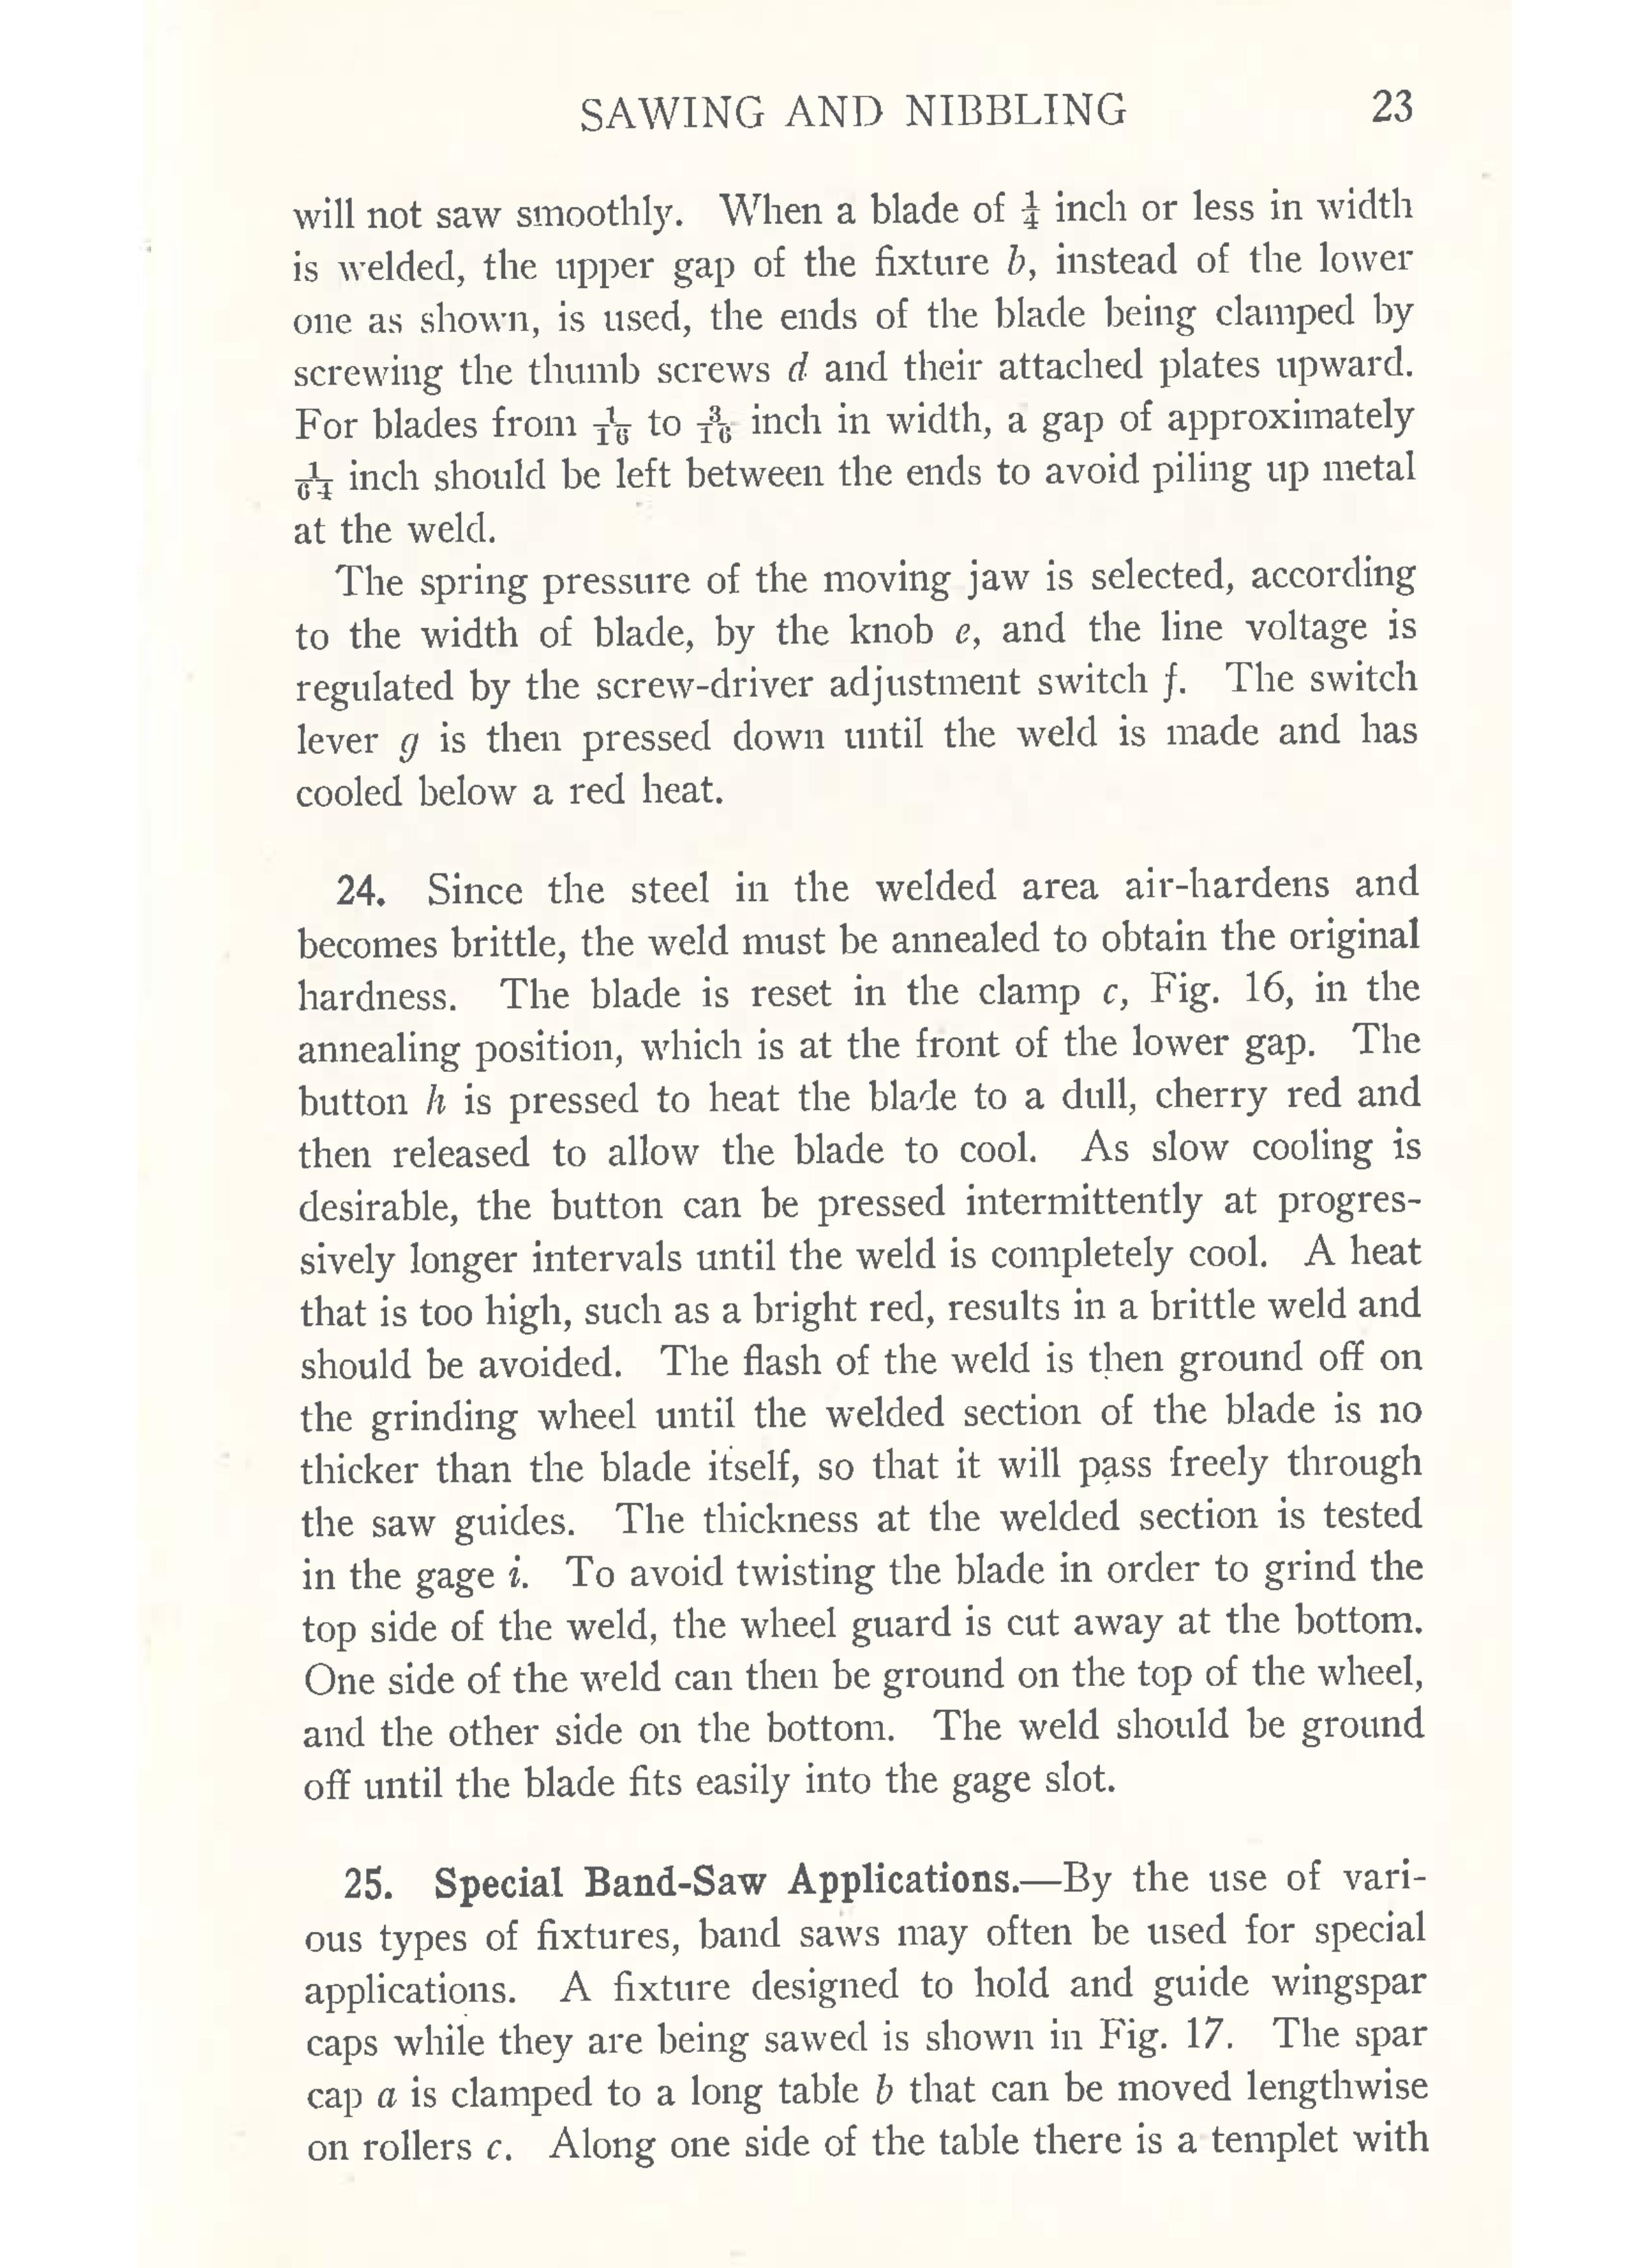 Sample page 24 from AirCorps Library document: Blanking & Punching - Shearing, Sawing, Nibbling - Bureau of Aeronautics